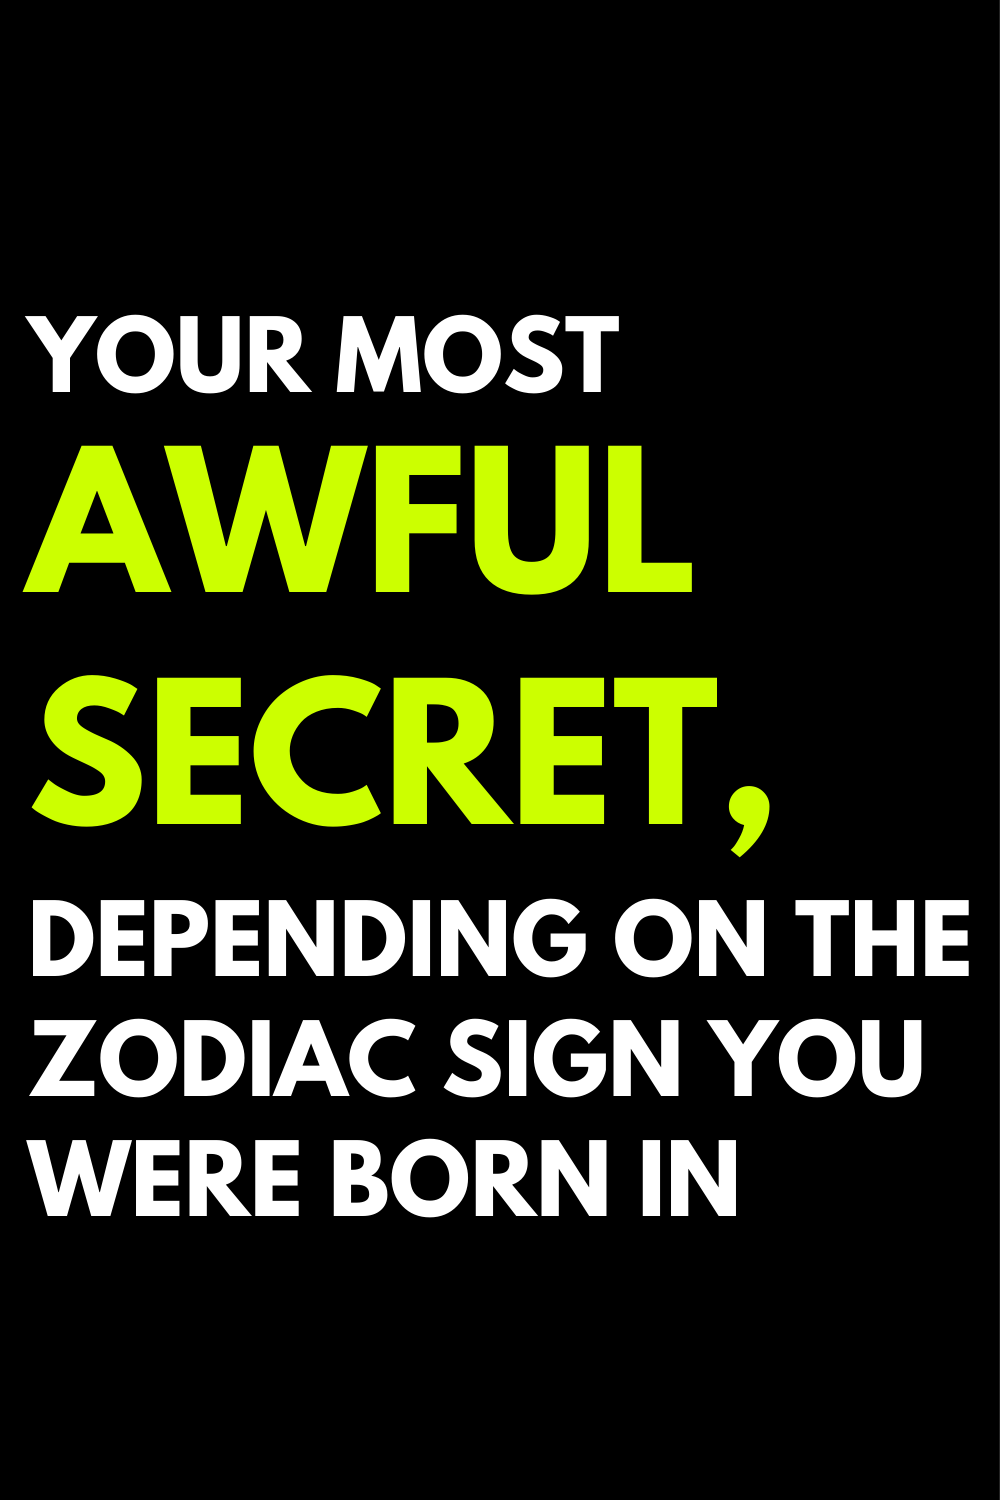 Your most awful secret, depending on the zodiac sign you were born in